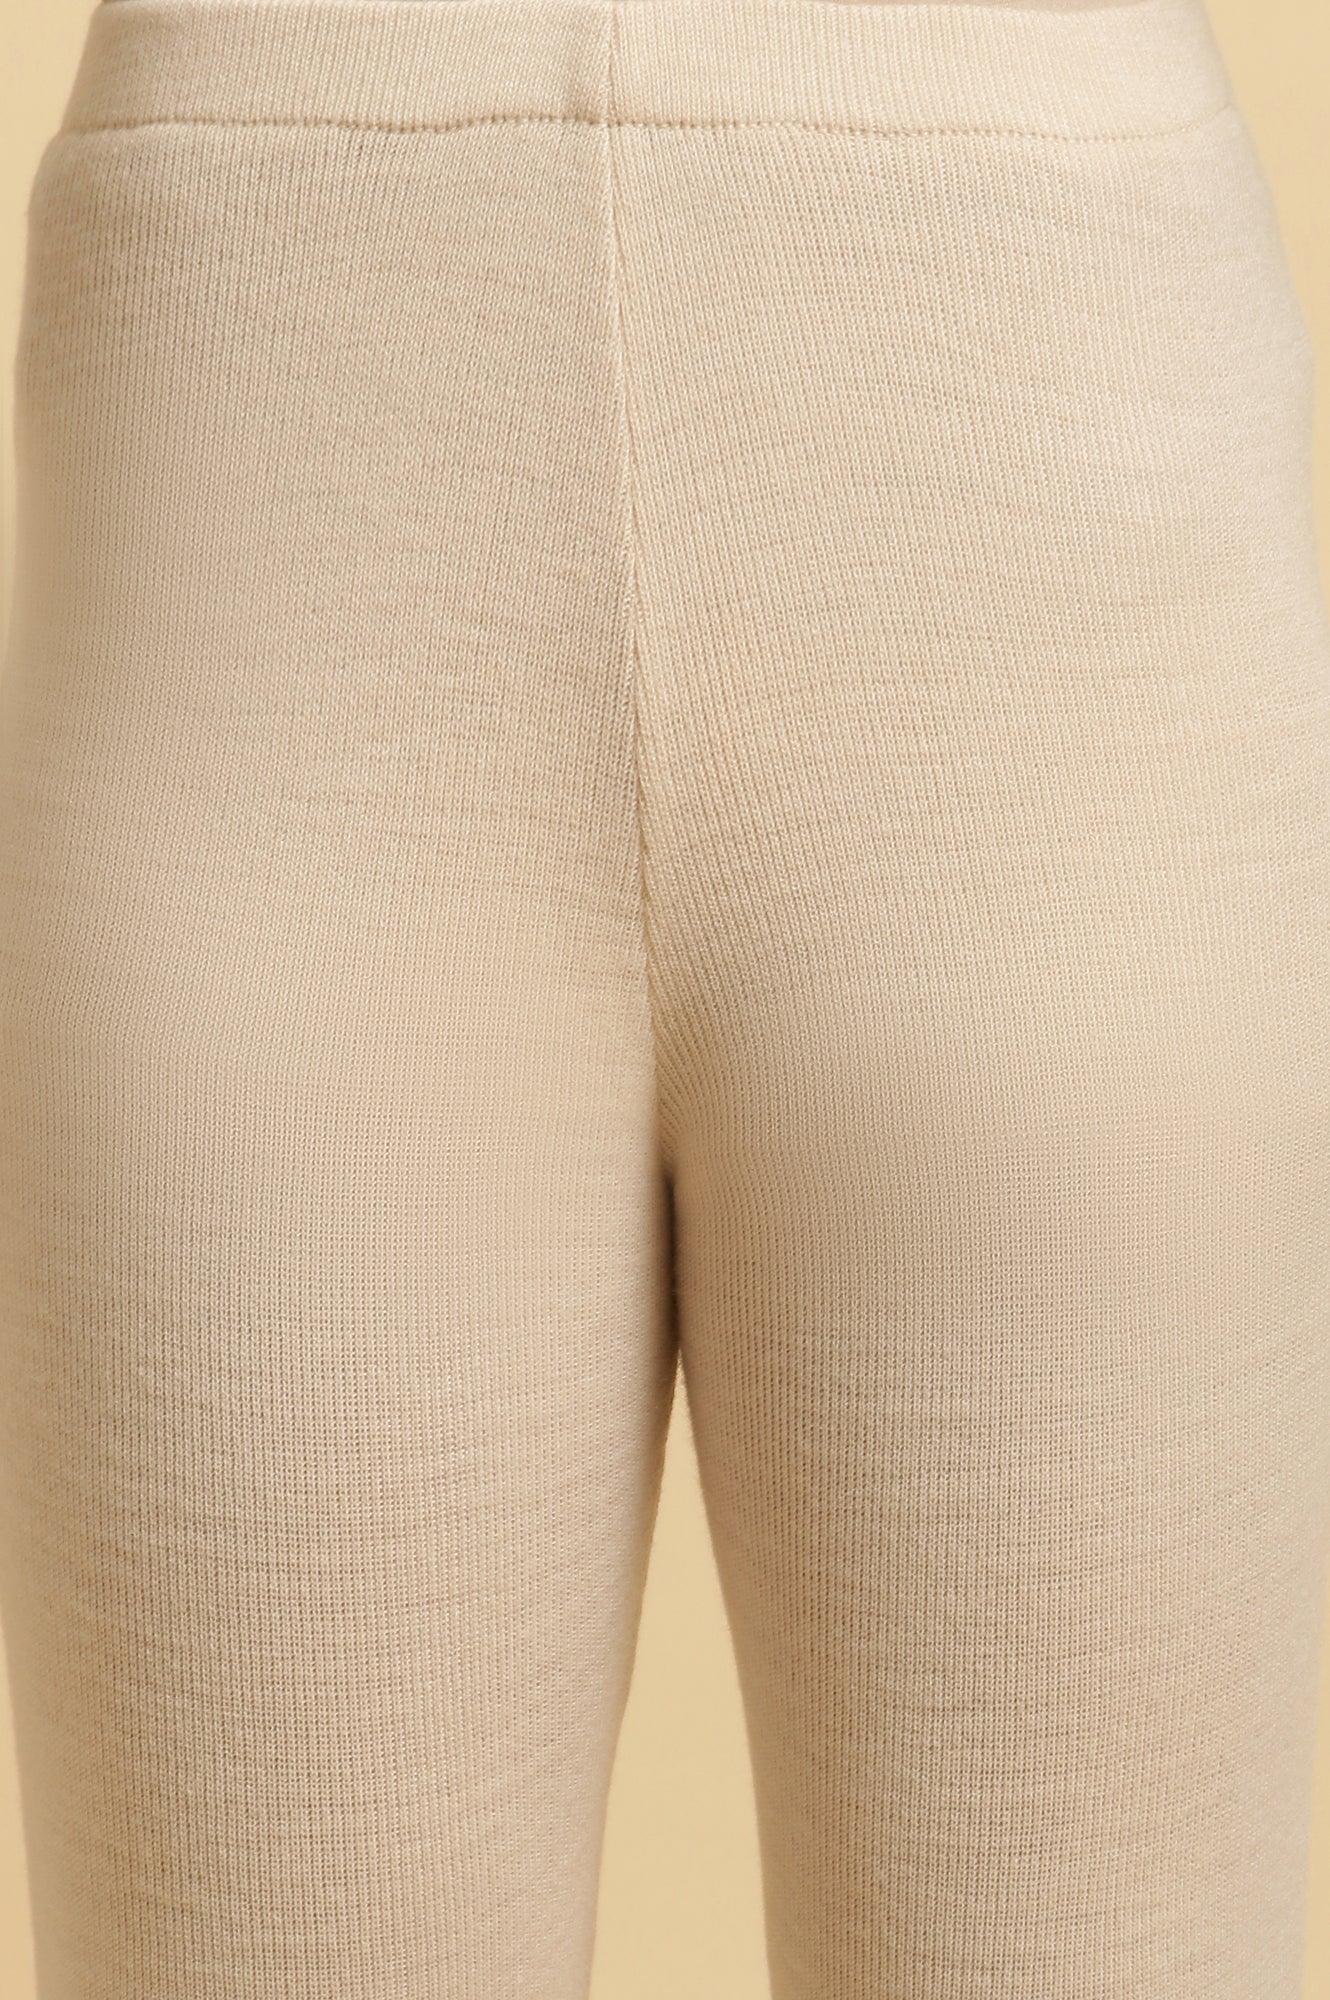 Off White Acrylic Winter Tights - wforwoman